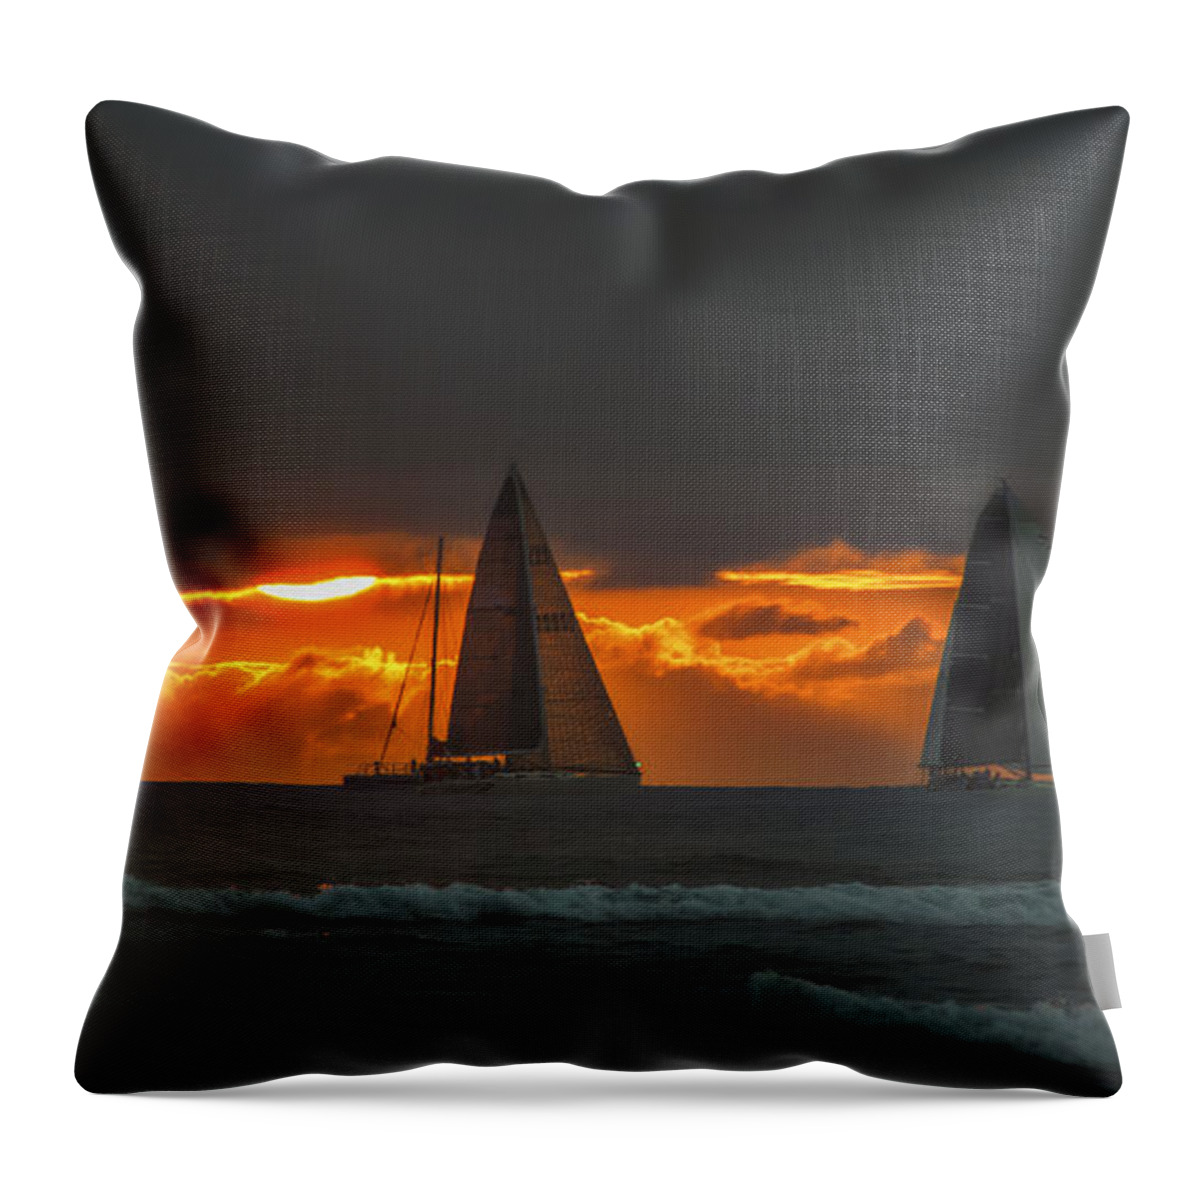 Wind And Water Throw Pillow featuring the photograph Wind And Water by Mitch Shindelbower